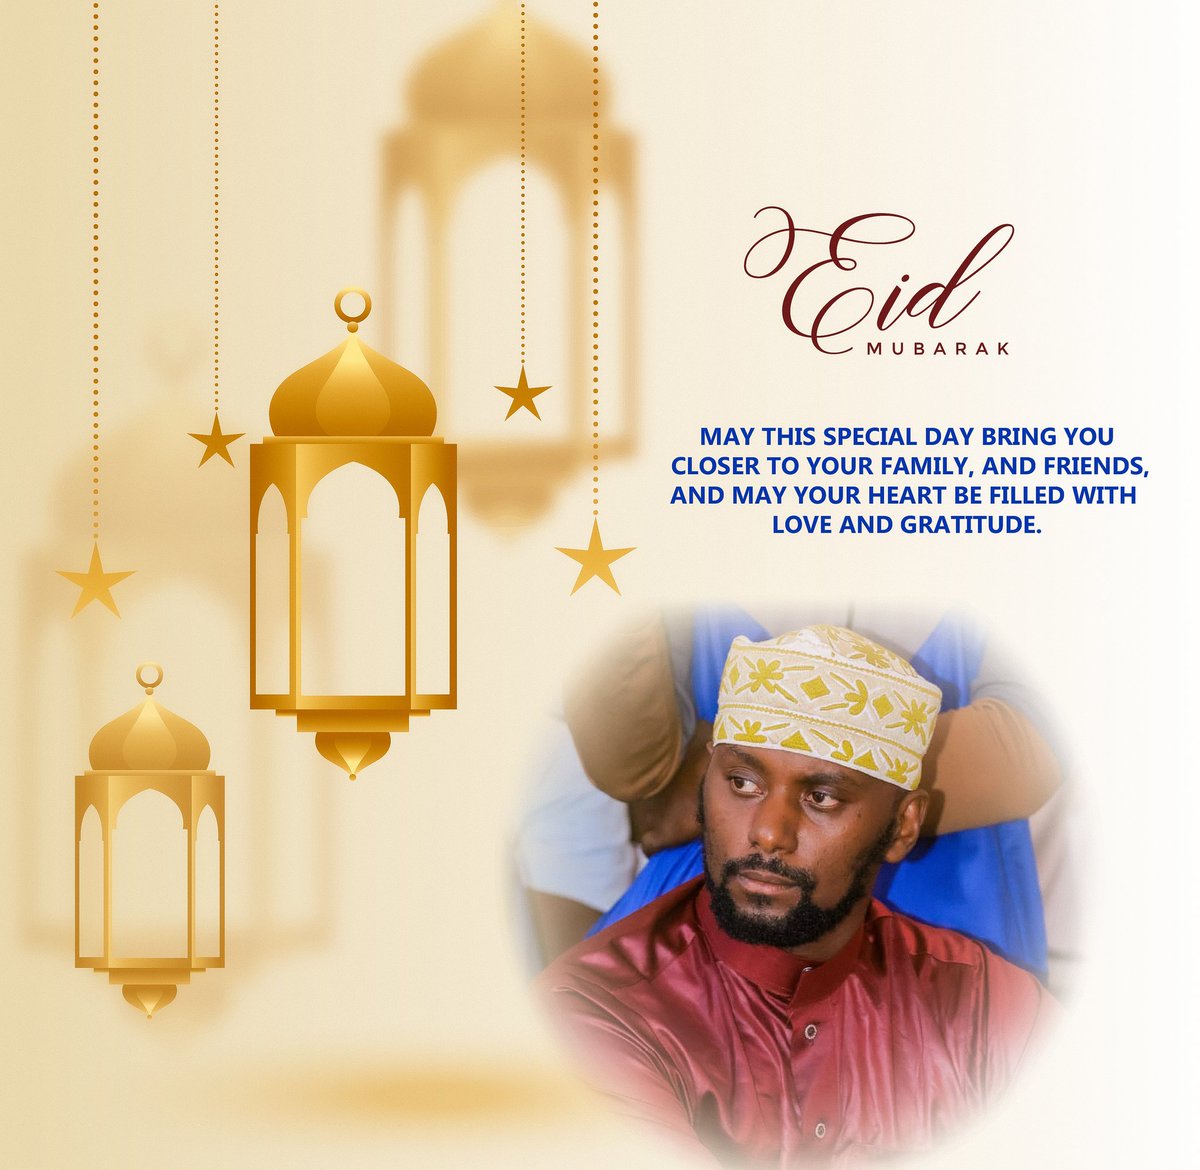 A blessed Eid celebration to you all. May Allah accept our supplications 🙏🏾